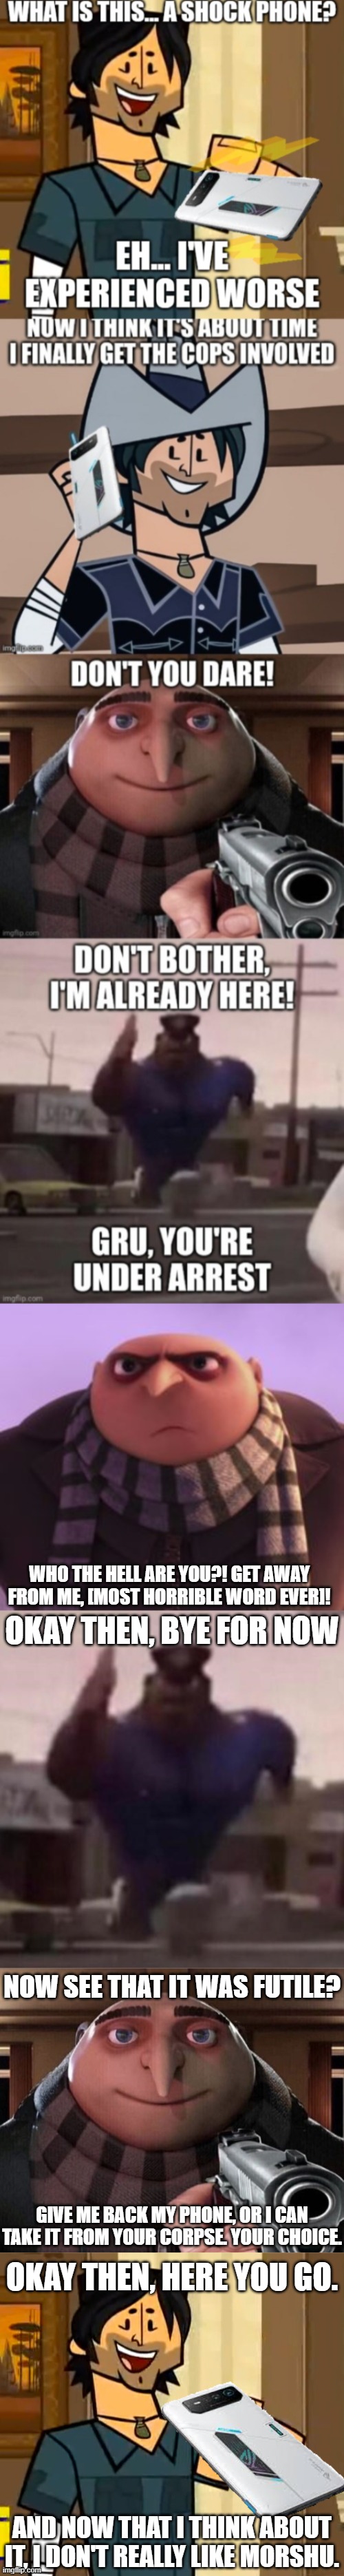 Gru drops the Hard R | WHO THE HELL ARE YOU?! GET AWAY FROM ME, [MOST HORRIBLE WORD EVER]! OKAY THEN, BYE FOR NOW; NOW SEE THAT IT WAS FUTILE? GIVE ME BACK MY PHONE, OR I CAN TAKE IT FROM YOUR CORPSE. YOUR CHOICE. OKAY THEN, HERE YOU GO. AND NOW THAT I THINK ABOUT IT, I DON'T REALLY LIKE MORSHU. | image tagged in angry gru,officer earl running,gru gun,total drama island chris mclean 2 | made w/ Imgflip meme maker